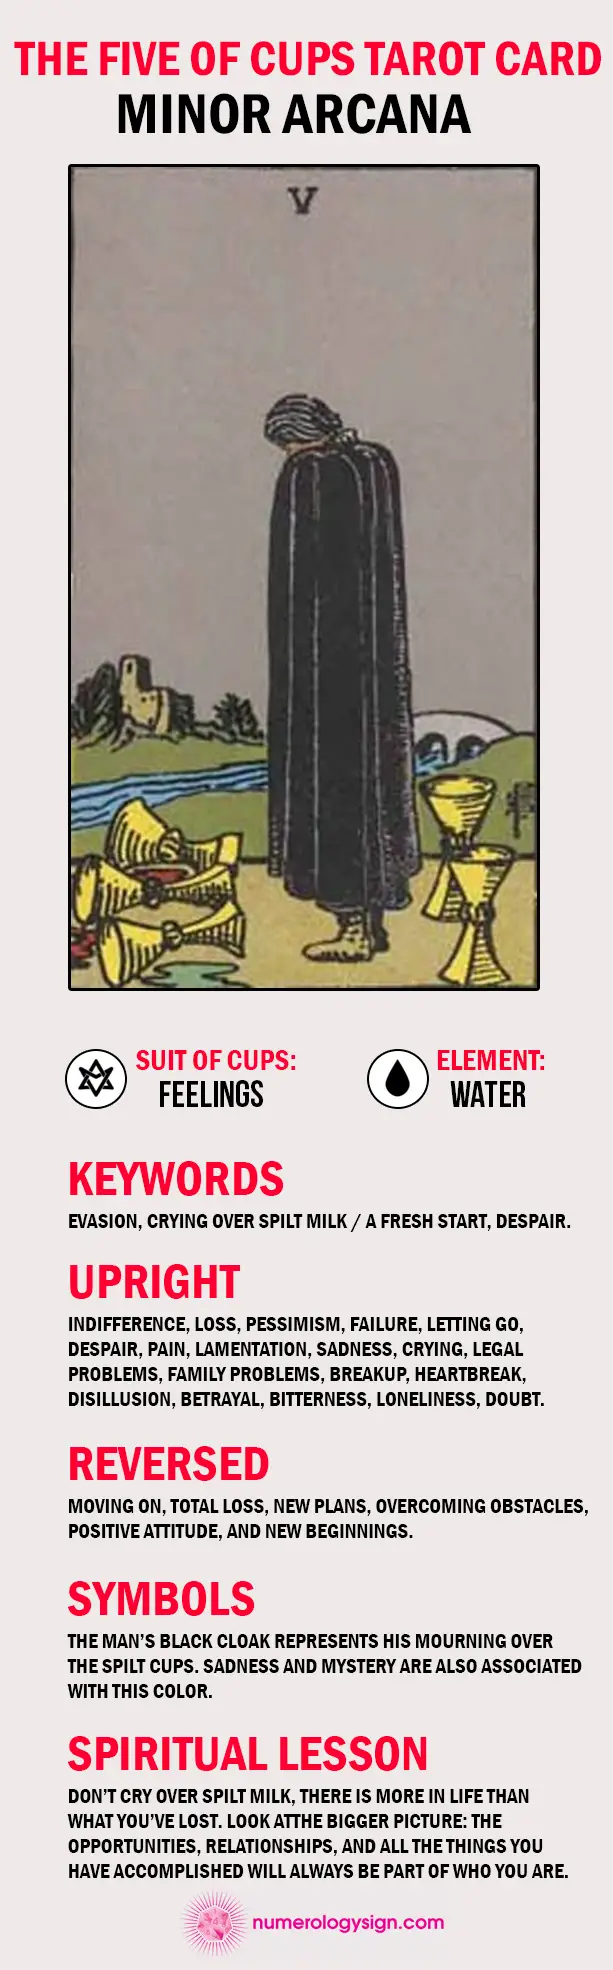 The Five of Cups Tarot Card Meaning Infographic - Minor Arcana